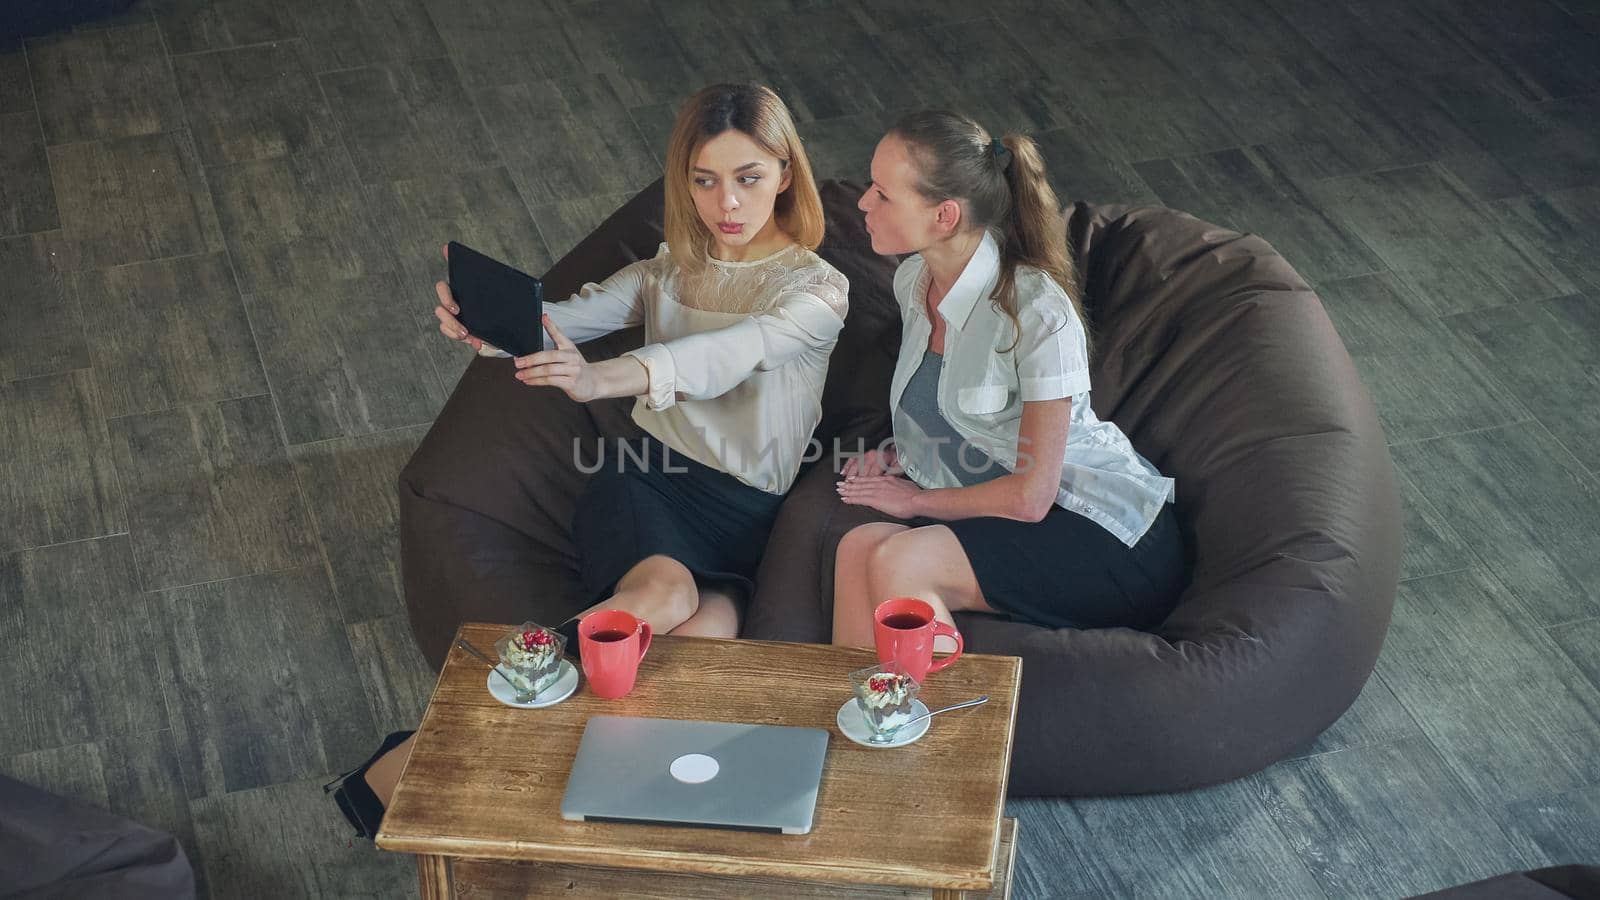 Two women take selfie in the cafe by digital tablet. On the table cups and laptop